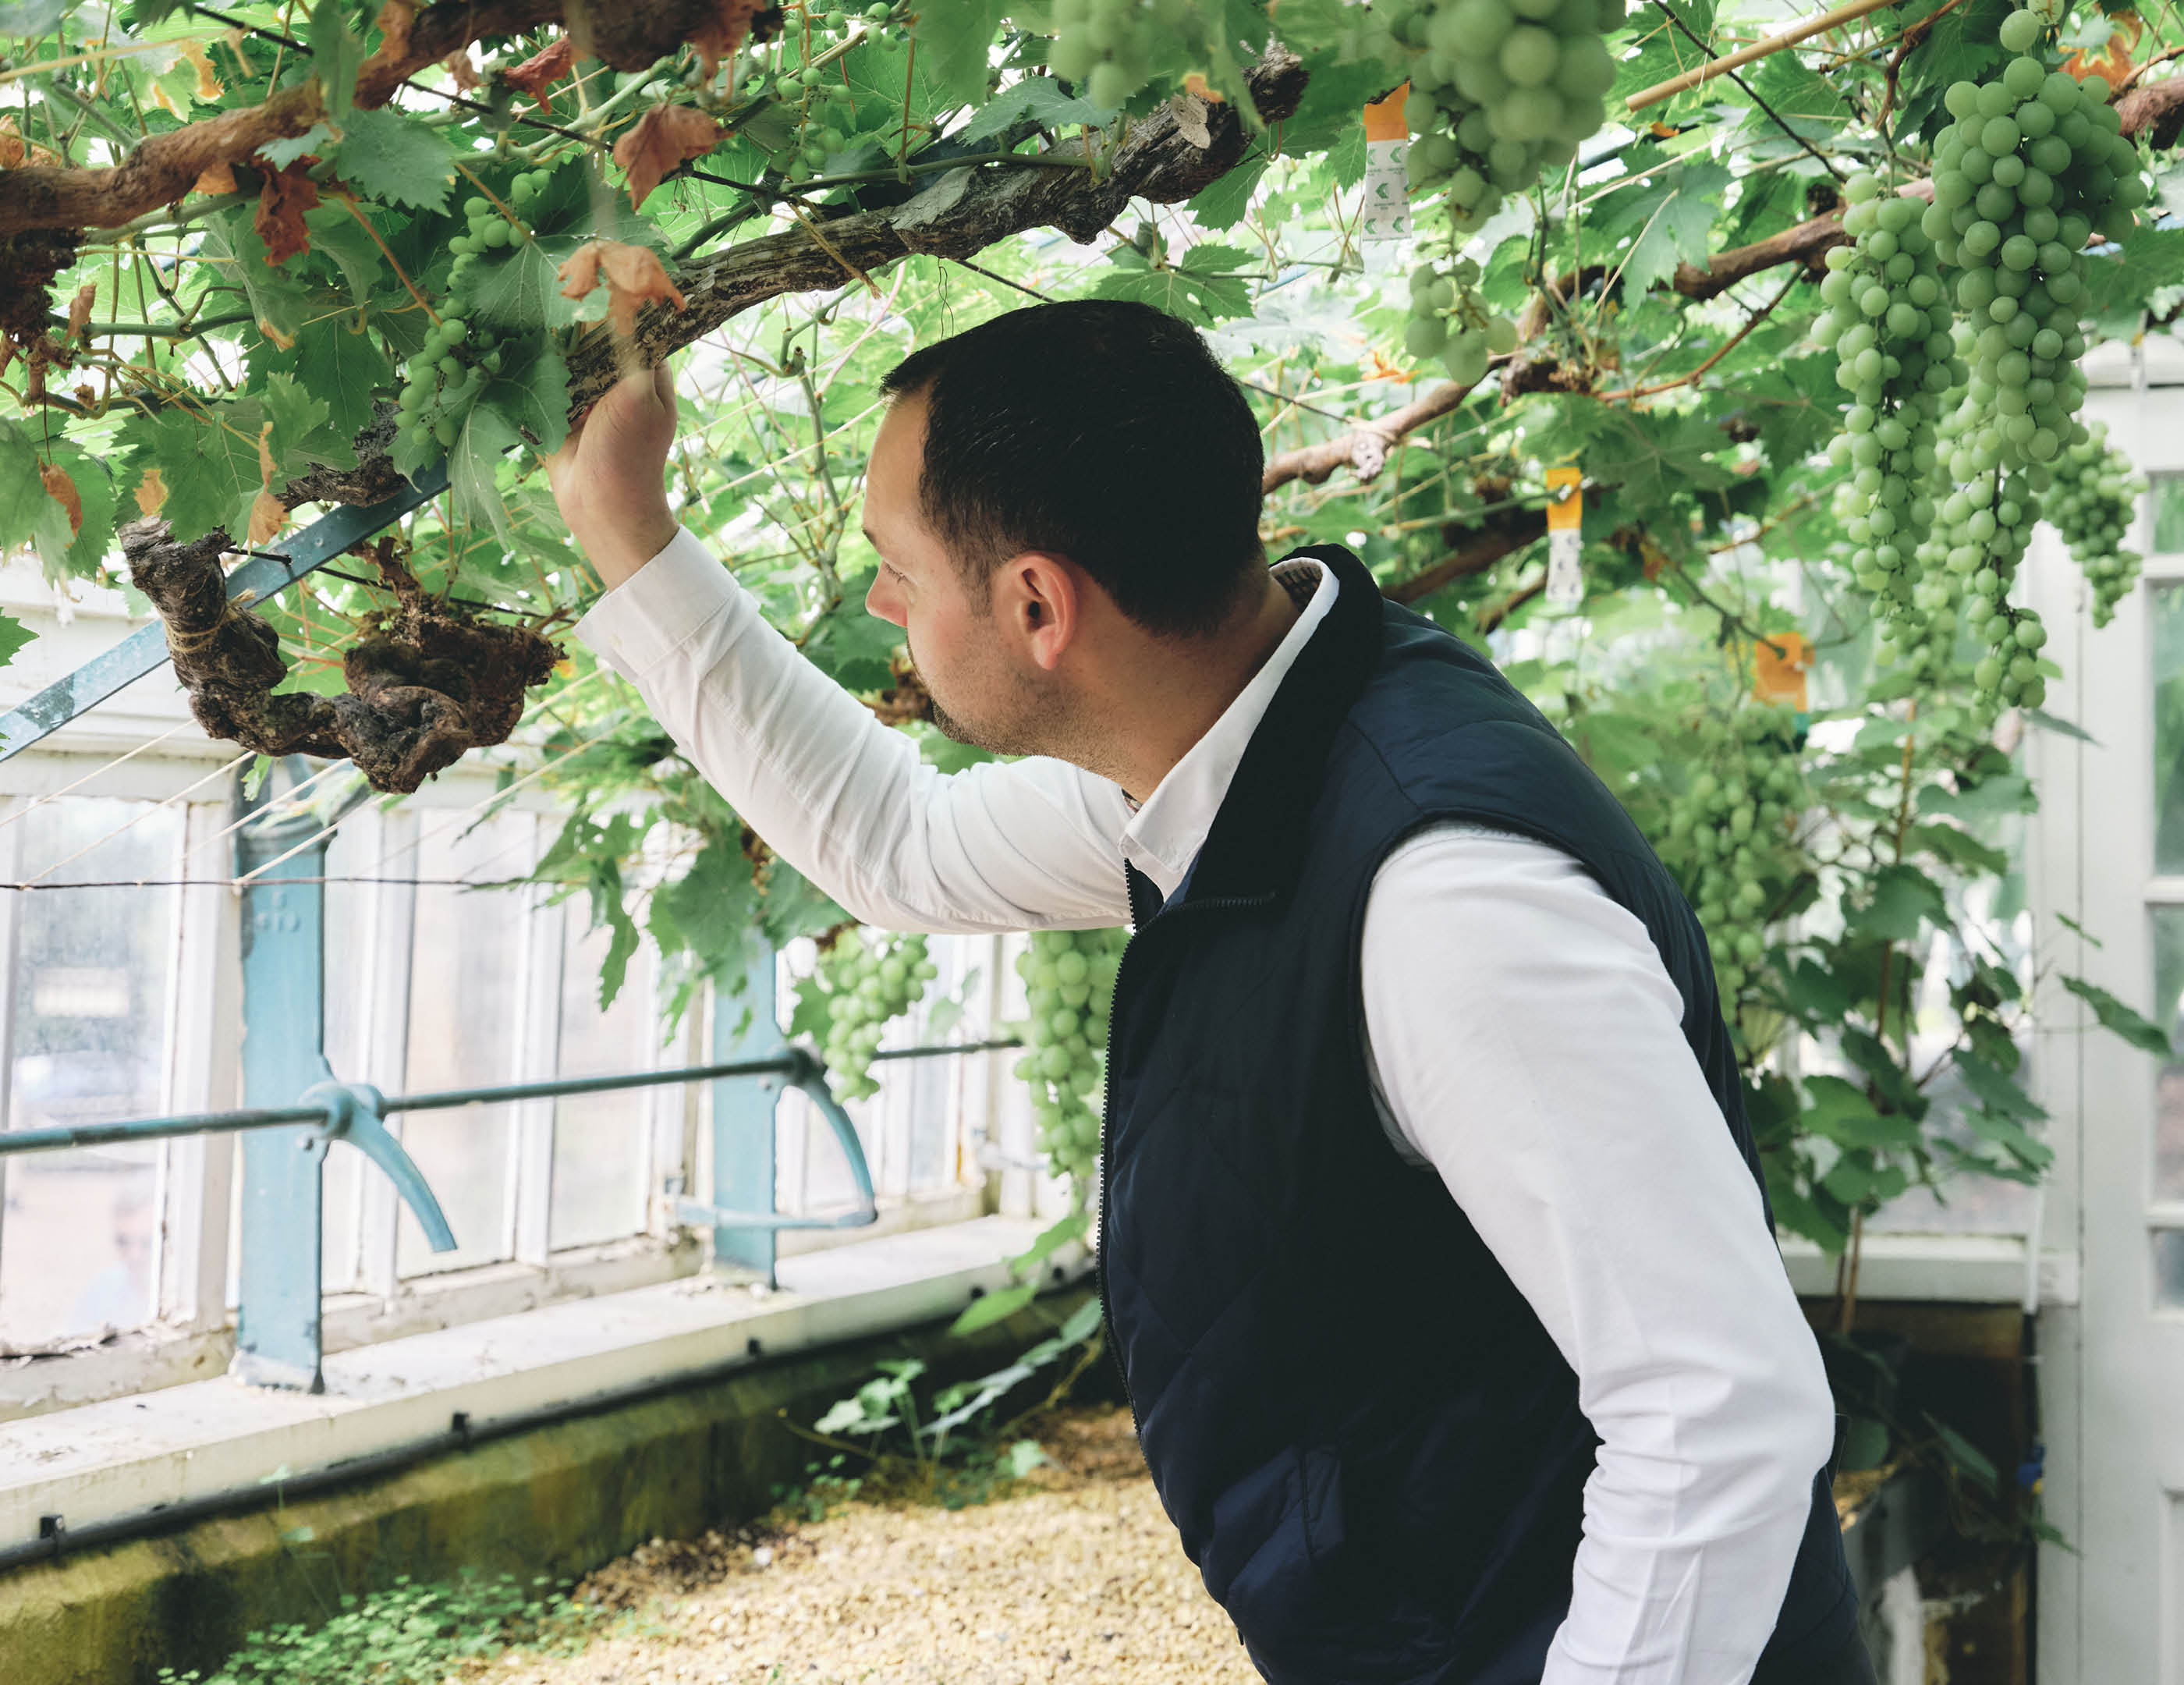 Robert grabs branch above him surrounded by grape vines in greenhouse